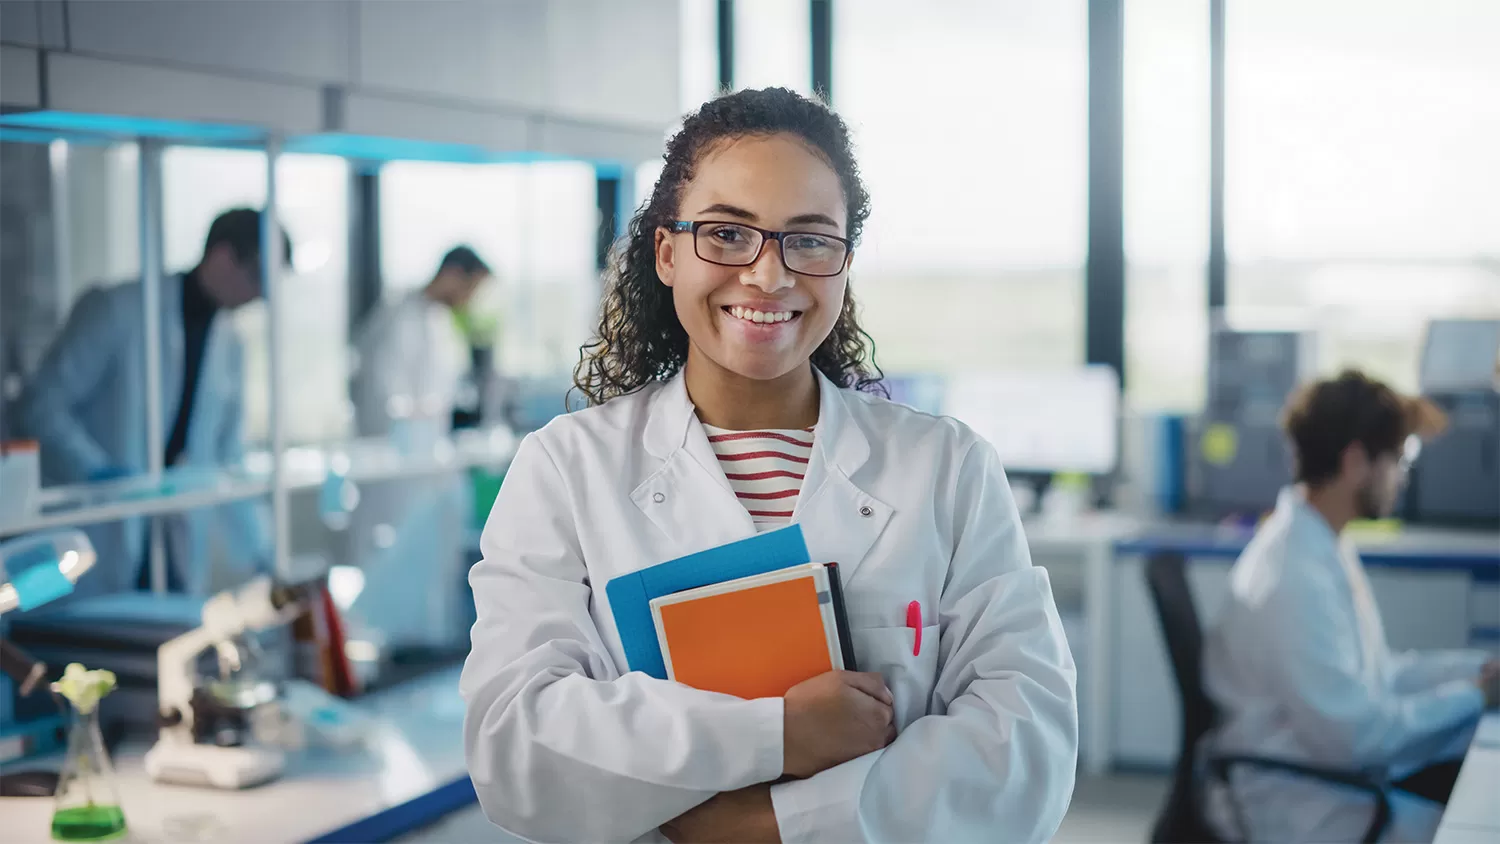 A female student in a lab coat smiling at the camera